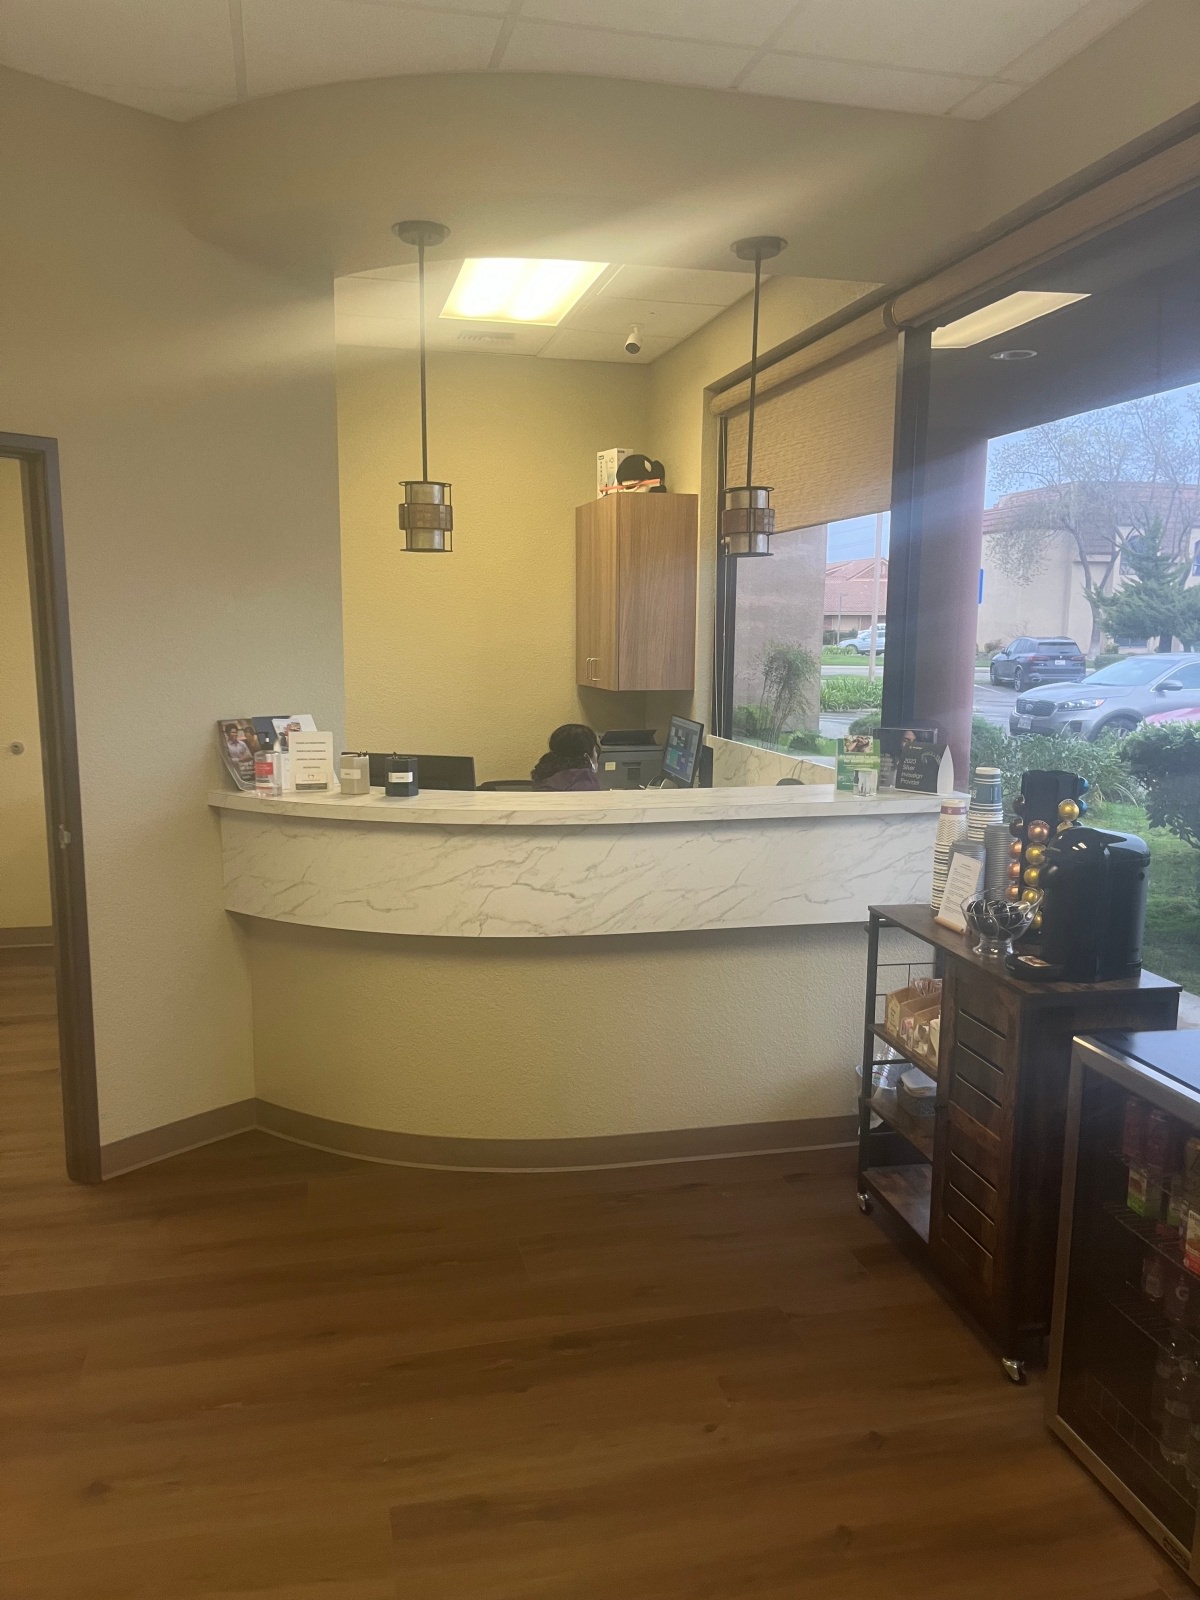 Dental office front desk completed by Dry Creek Construction - lightbox